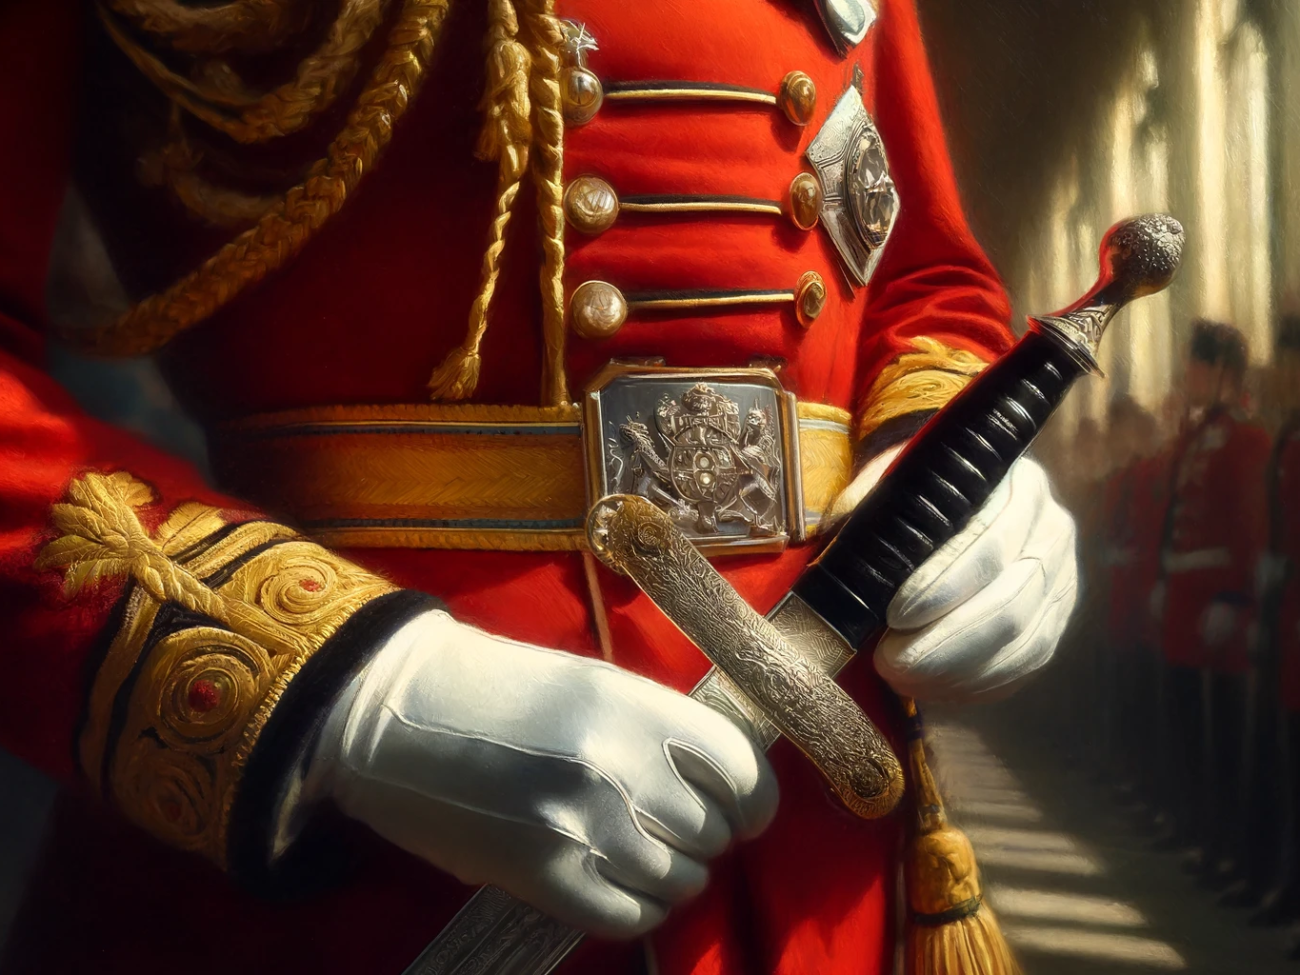 DALL·E 2024-04-05 12.04.32 - Create an oil painting with warm, subtle, and cool tones capturing the close-up details of a ceremonial sword in a sheath held by a person in ceremoni